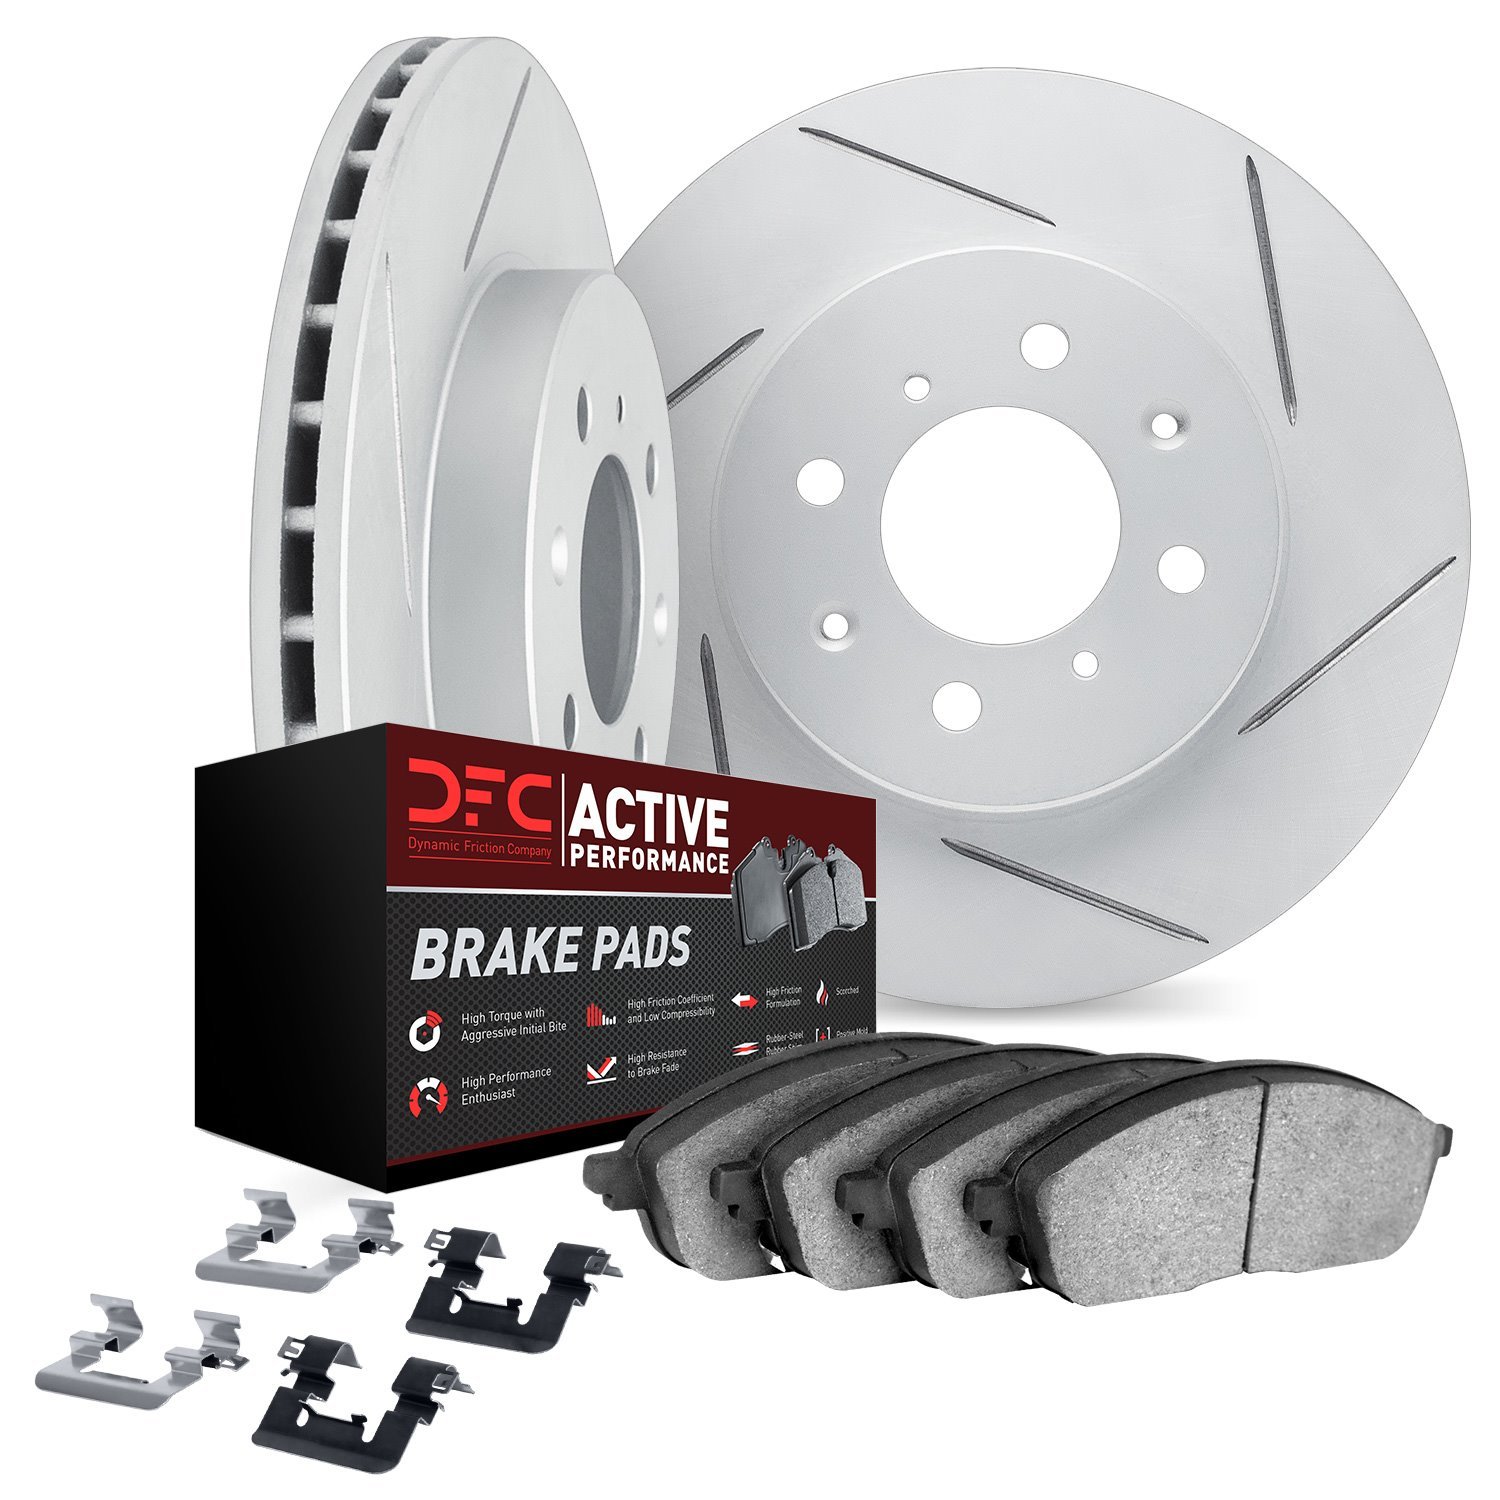 2712-59027 Geoperformance Slotted Brake Rotors with Active Performance Pads Kits & Hardware, 1990-2000 Acura/Honda, Position: Fr